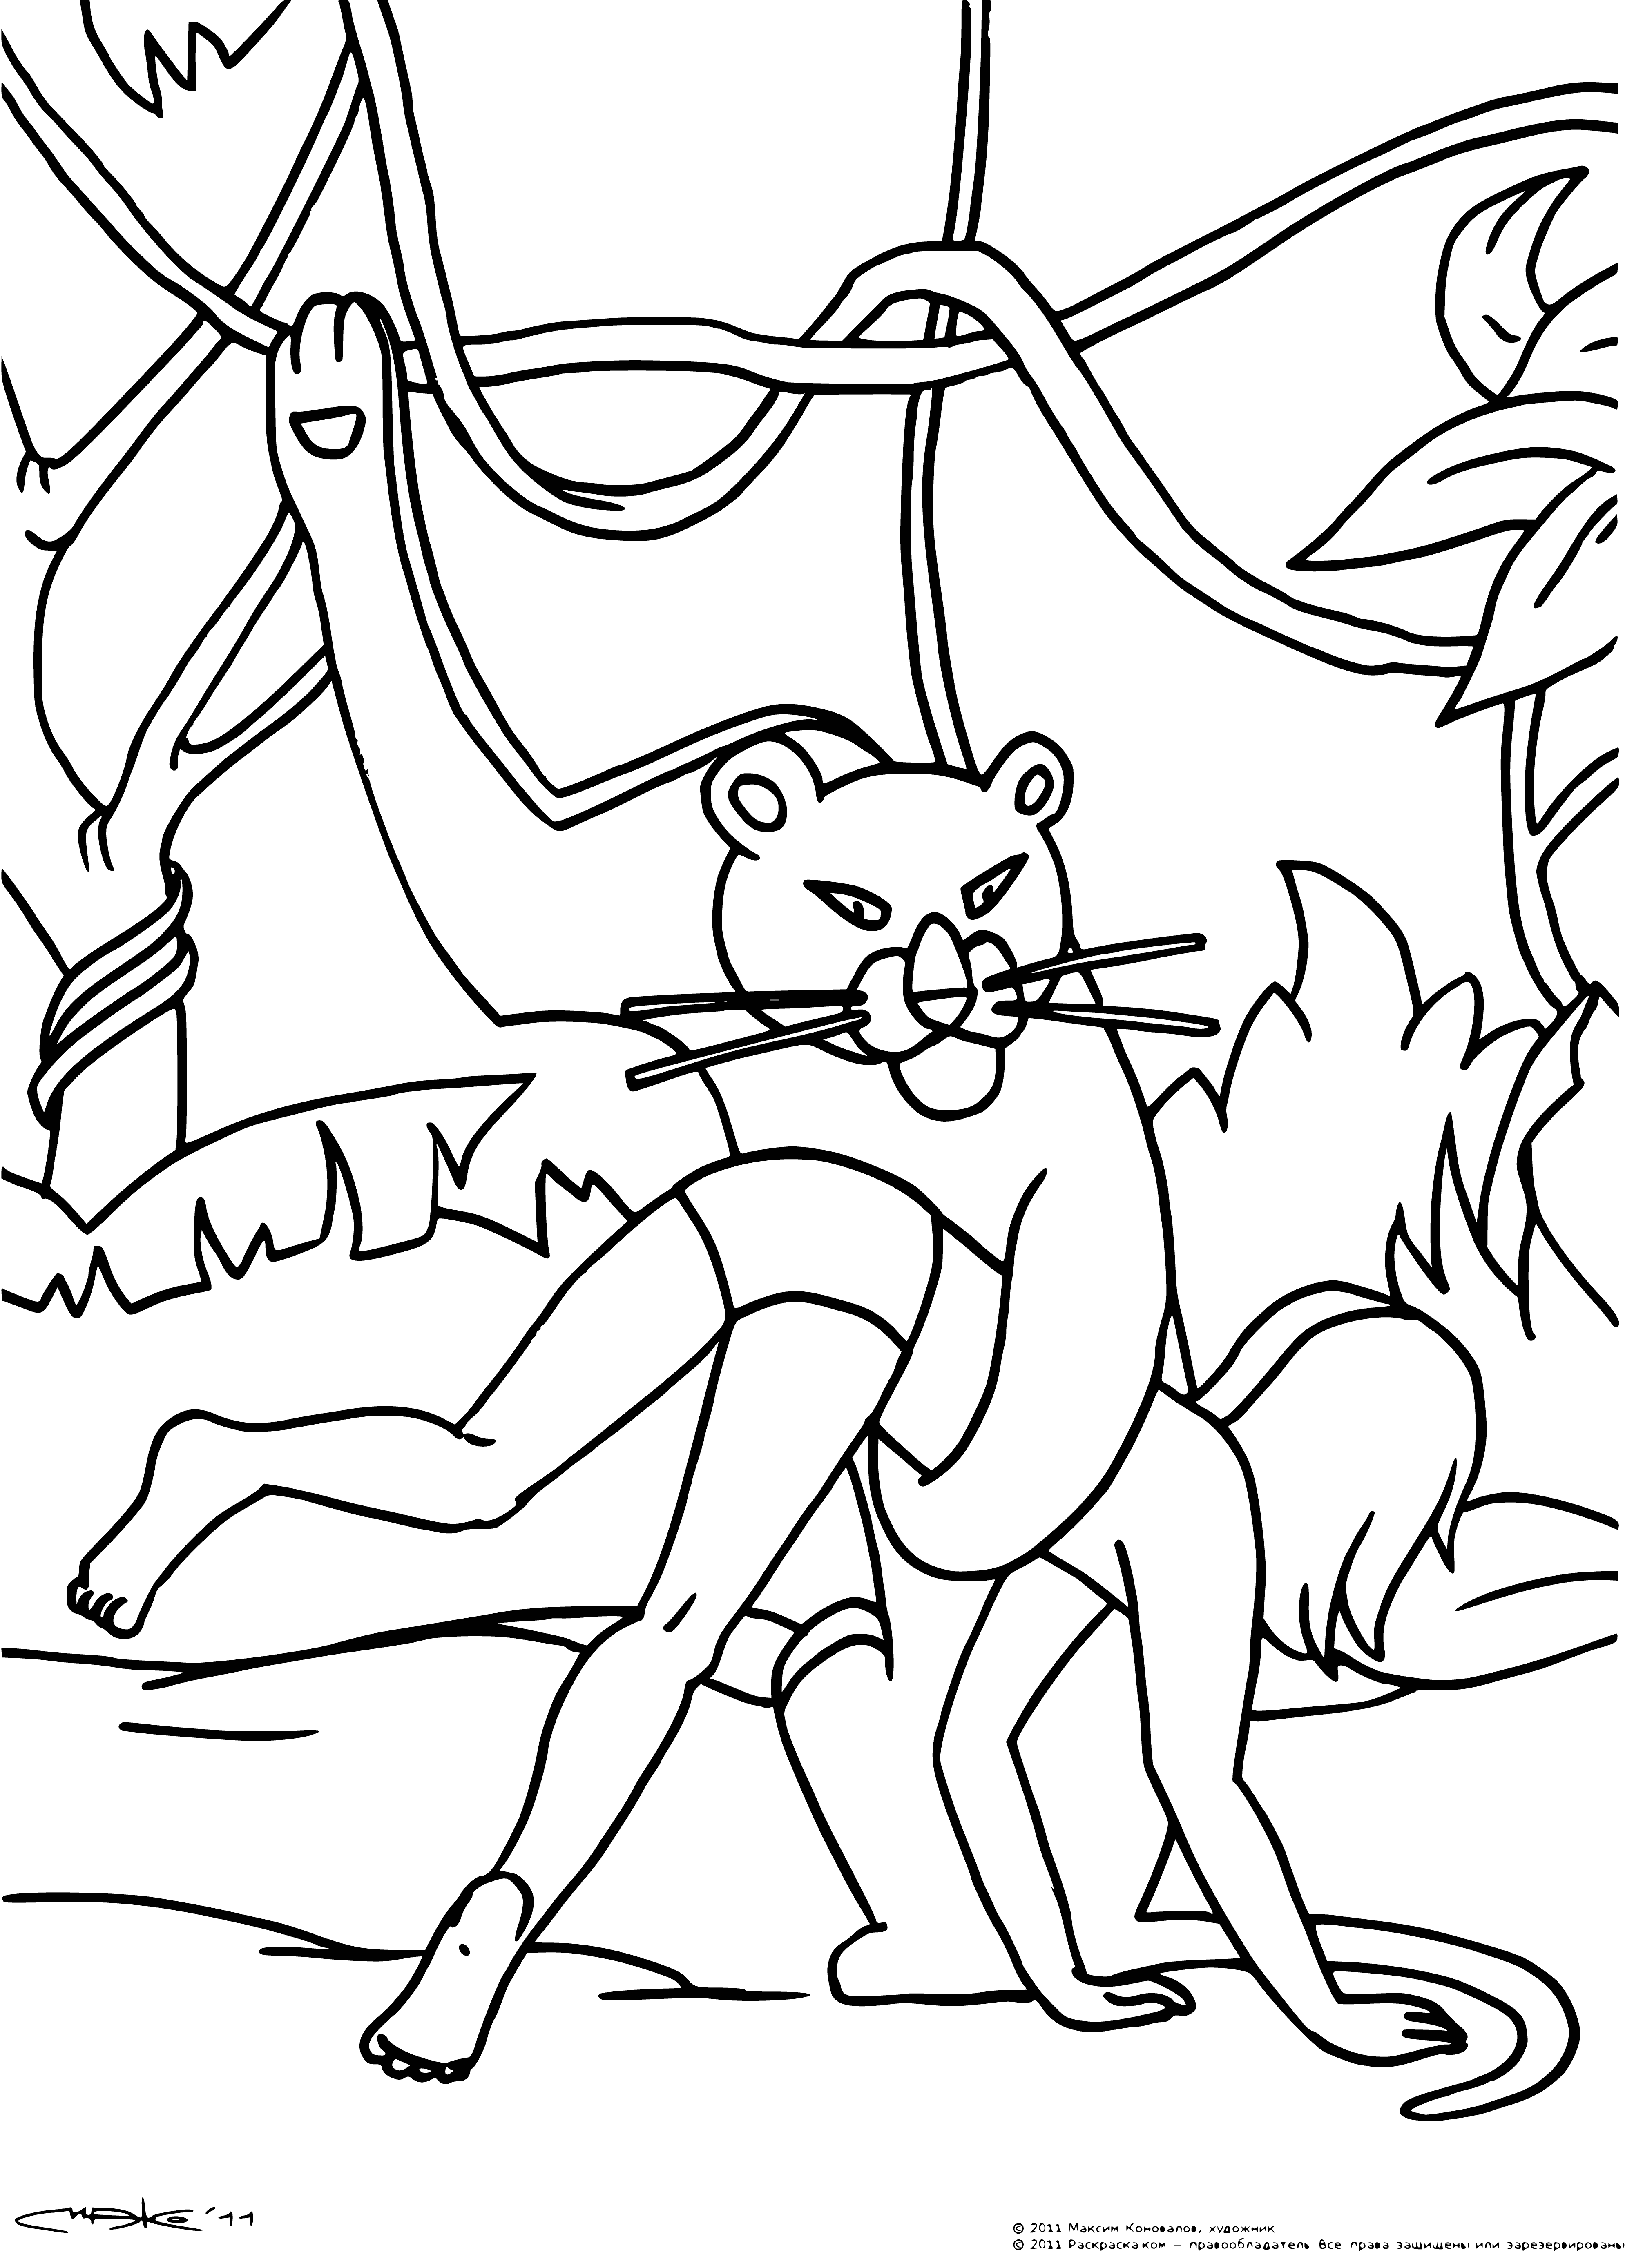 coloring page: Mowgli is a barefoot boy with dark hair, brown eyes, a dirty shirt & pants holding a big iron paw.